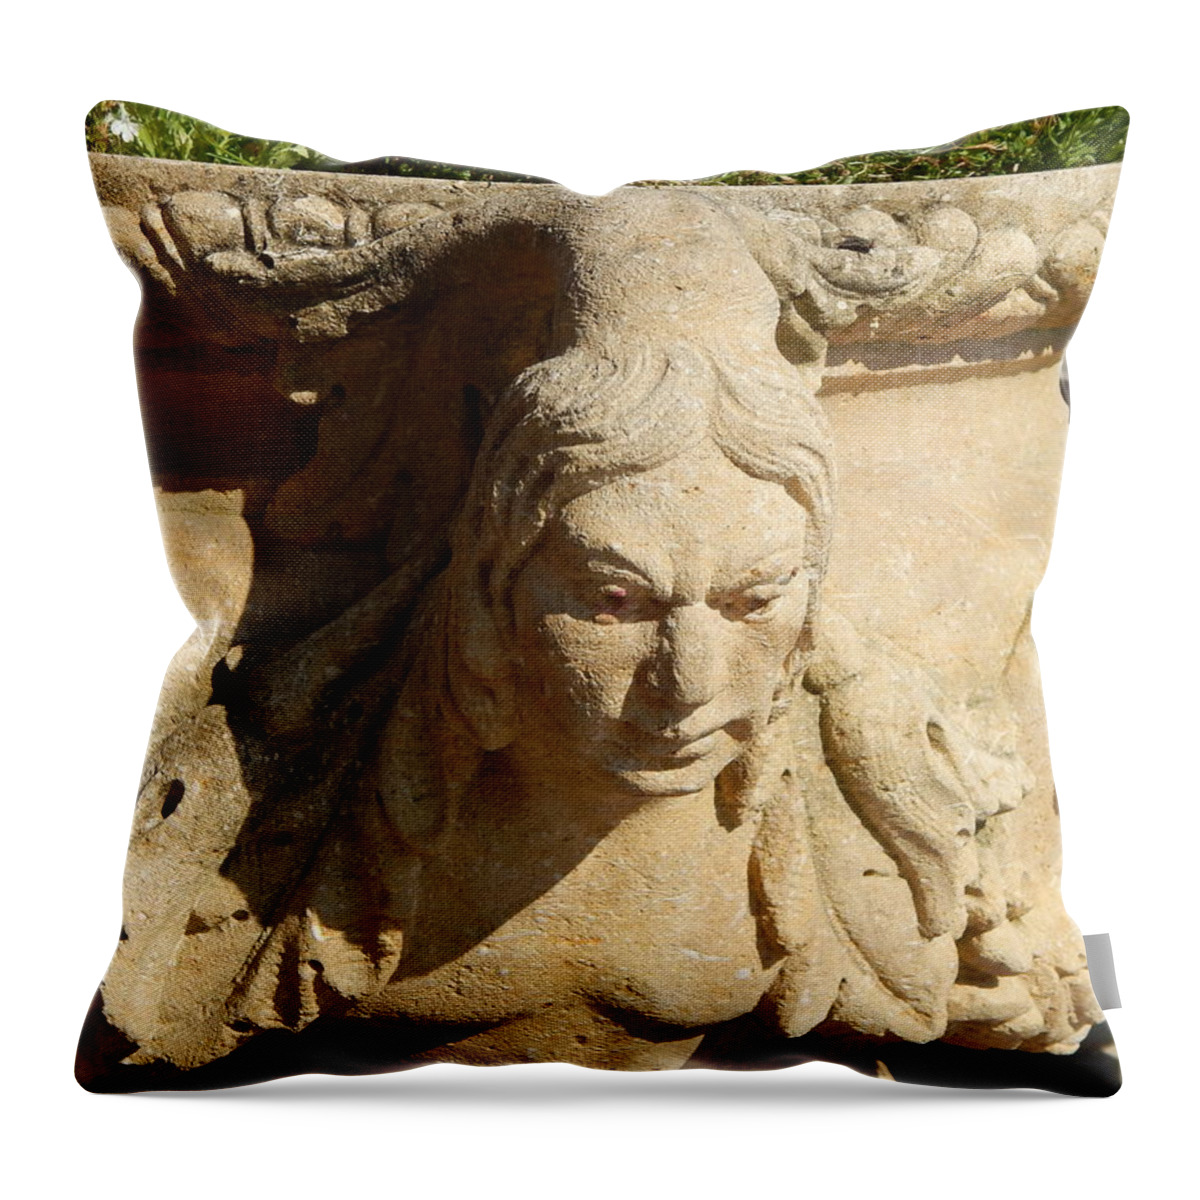 Park Throw Pillow featuring the photograph Garden furniture and small architectural forms by Oleg Prokopenko